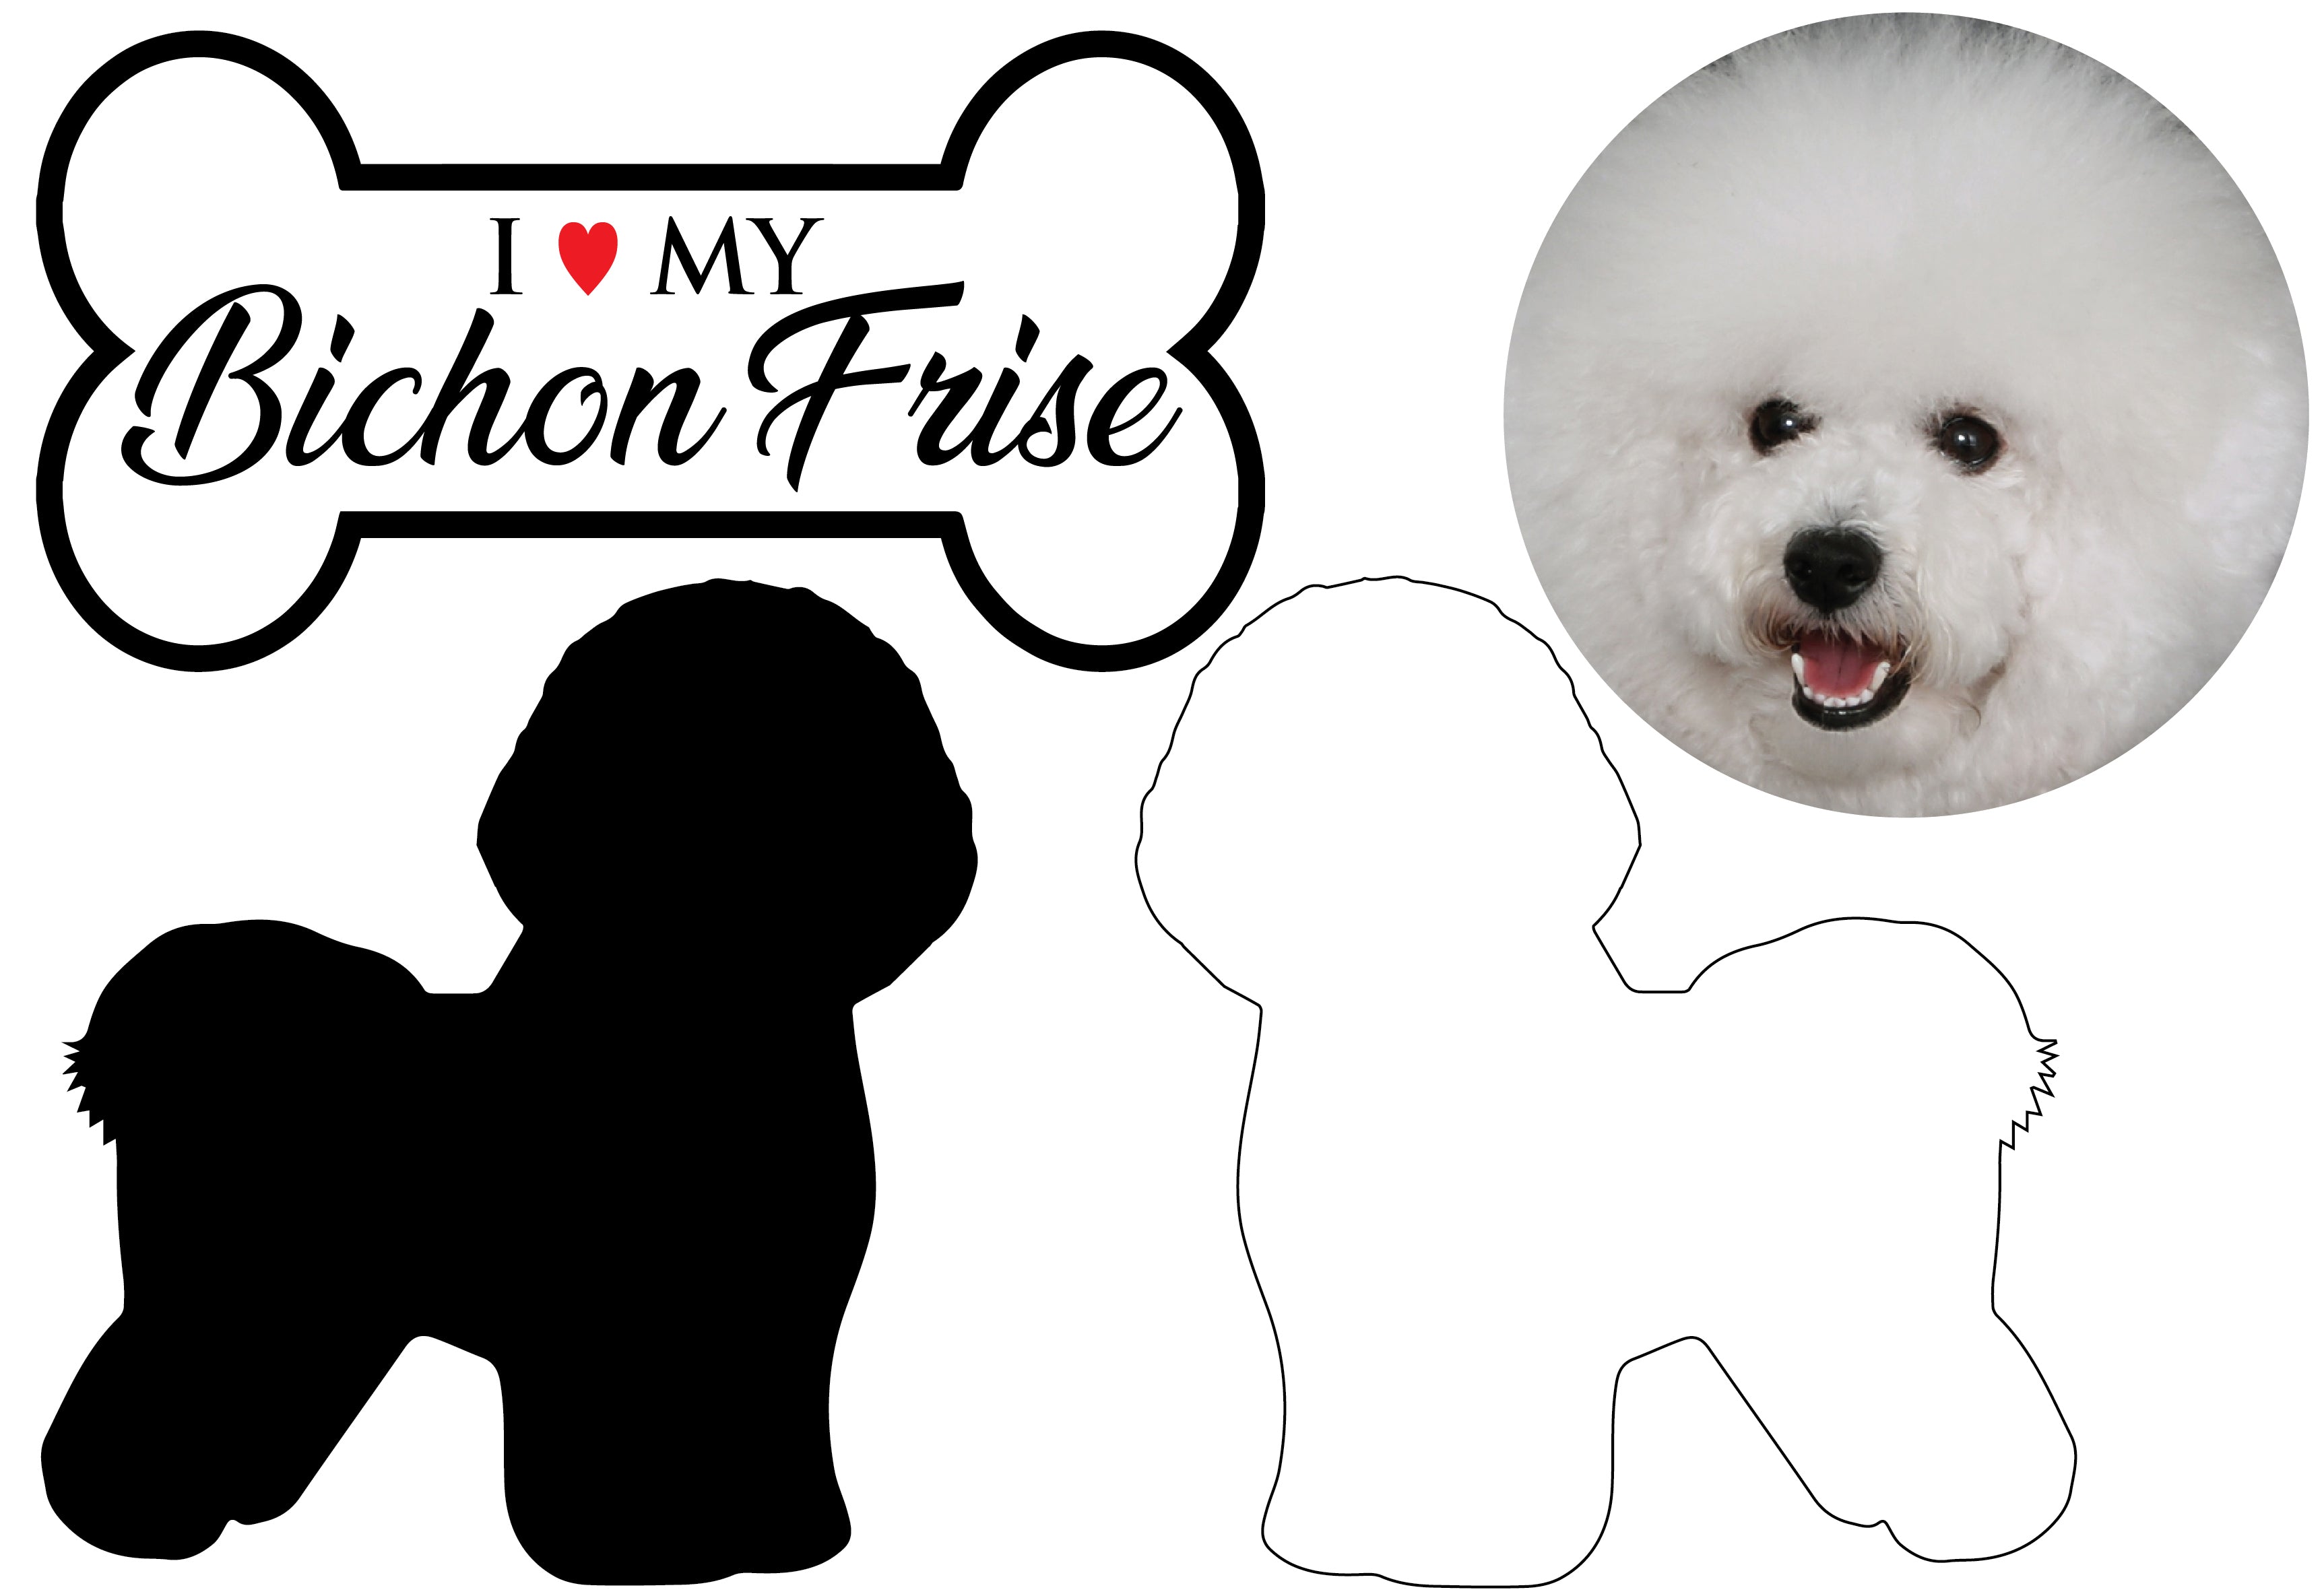 Bichon Frise - Dog Breed Decals (Set of 16) - Sizes in Description